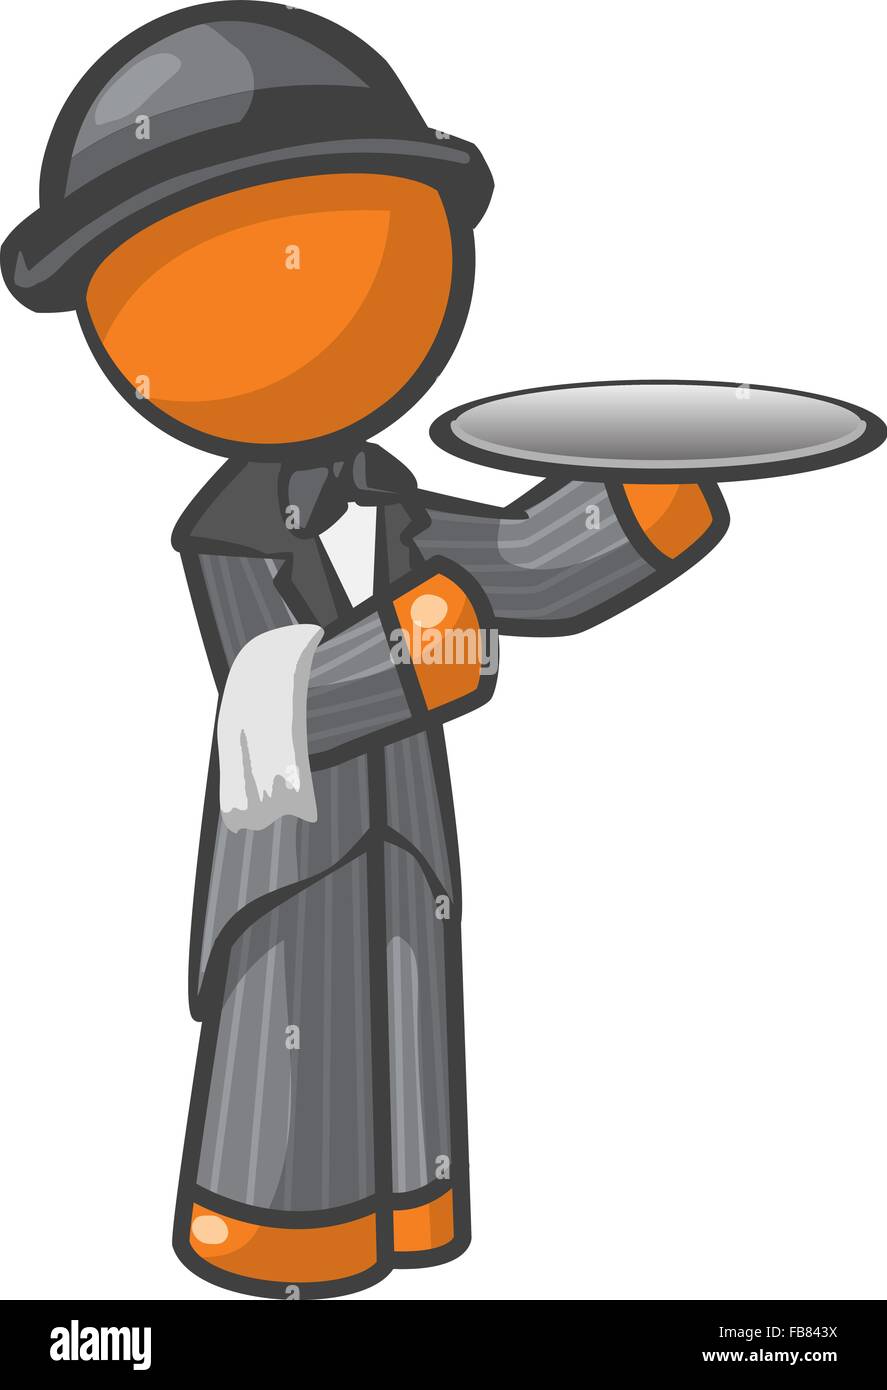 Orange man butler or house servant, a gentleman's man or someone who  waits on the 'priveleged'. Stock Vector